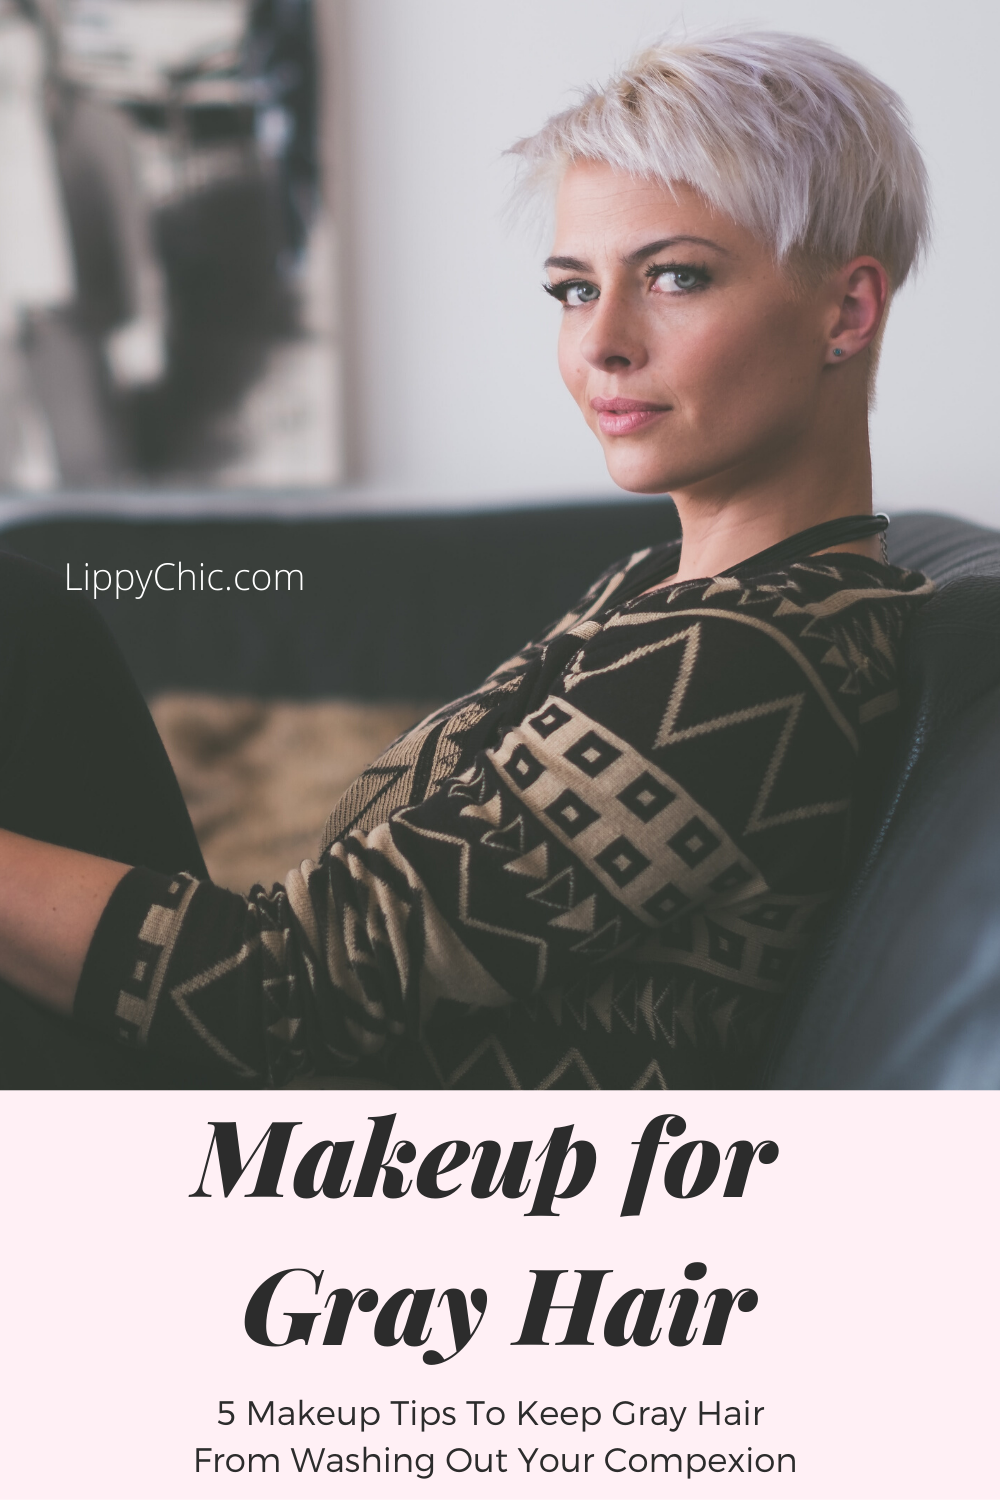 Makeup Tips for Gray Hair - Lippy Chic